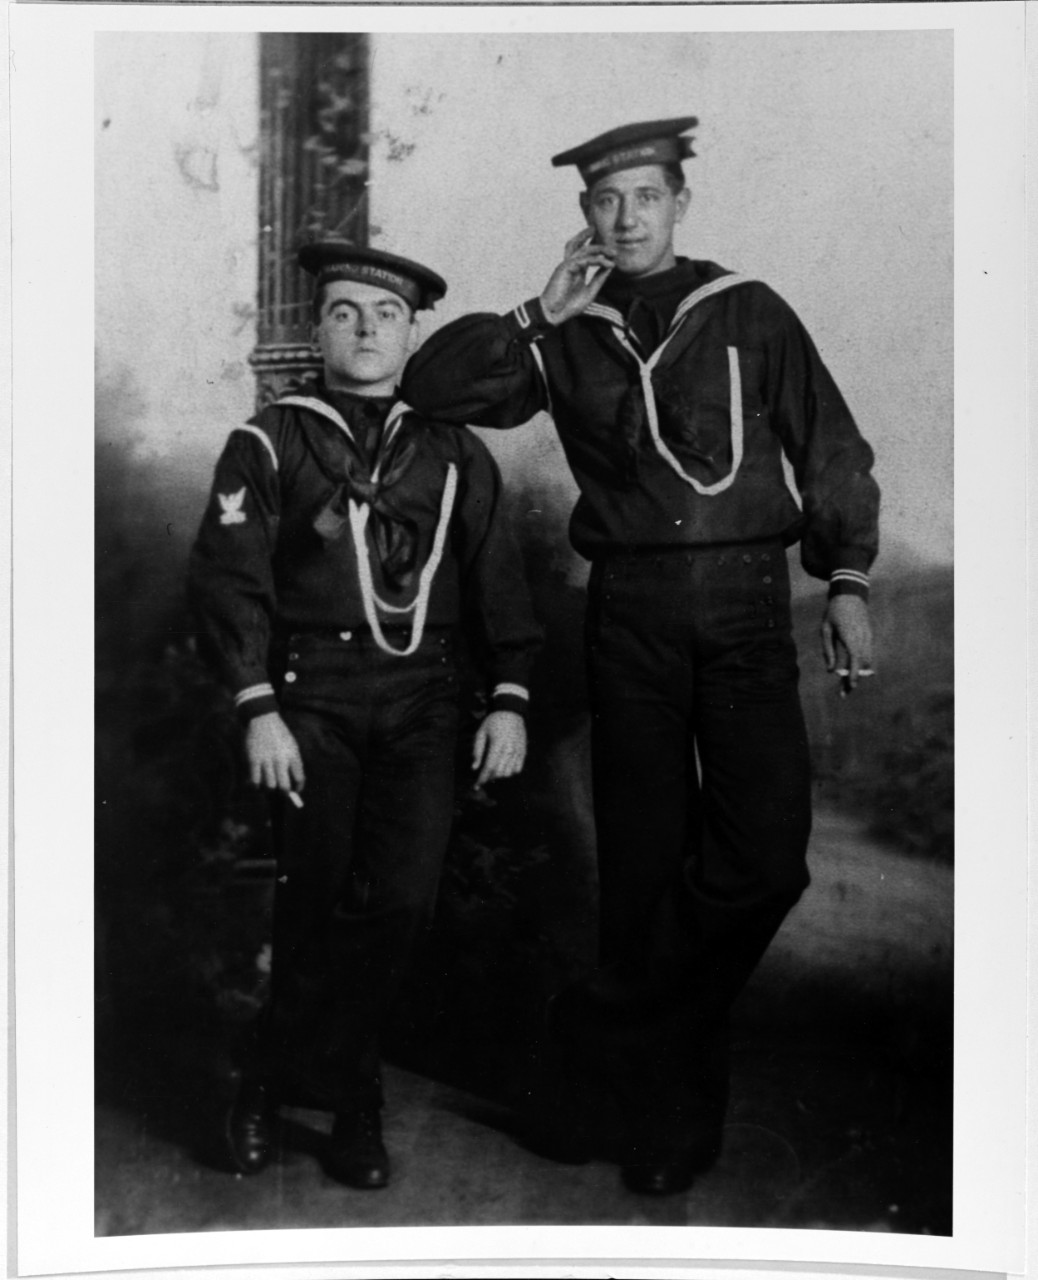 Enlisted personnel, circa 1890s.